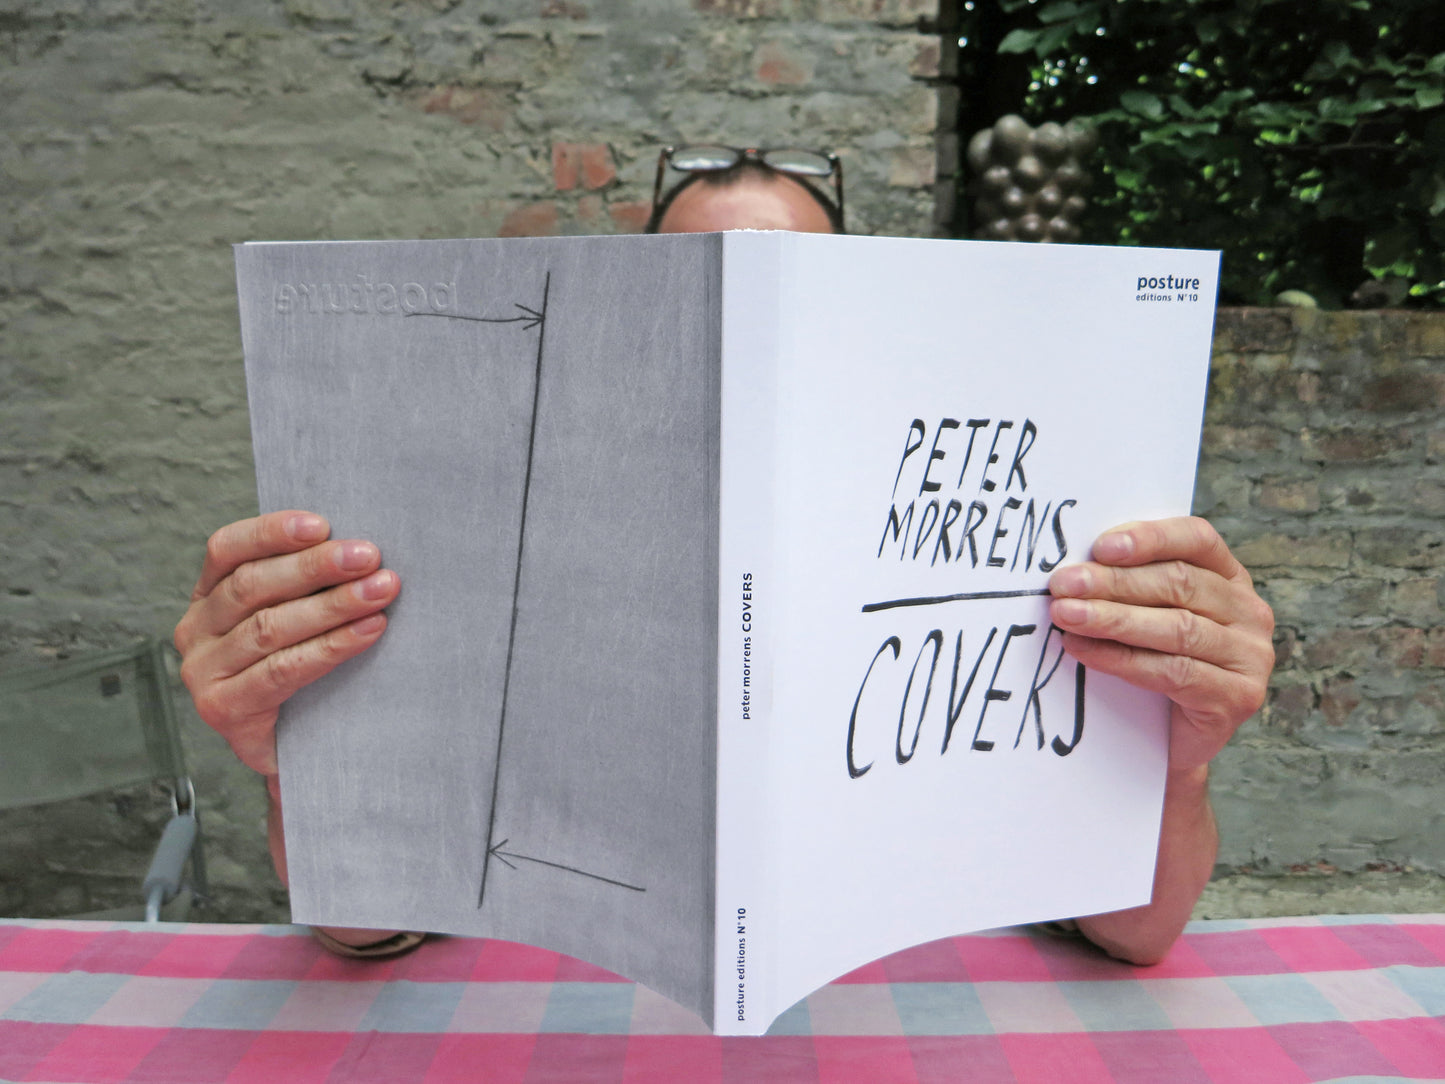 Peter Morrens ‘Covers’